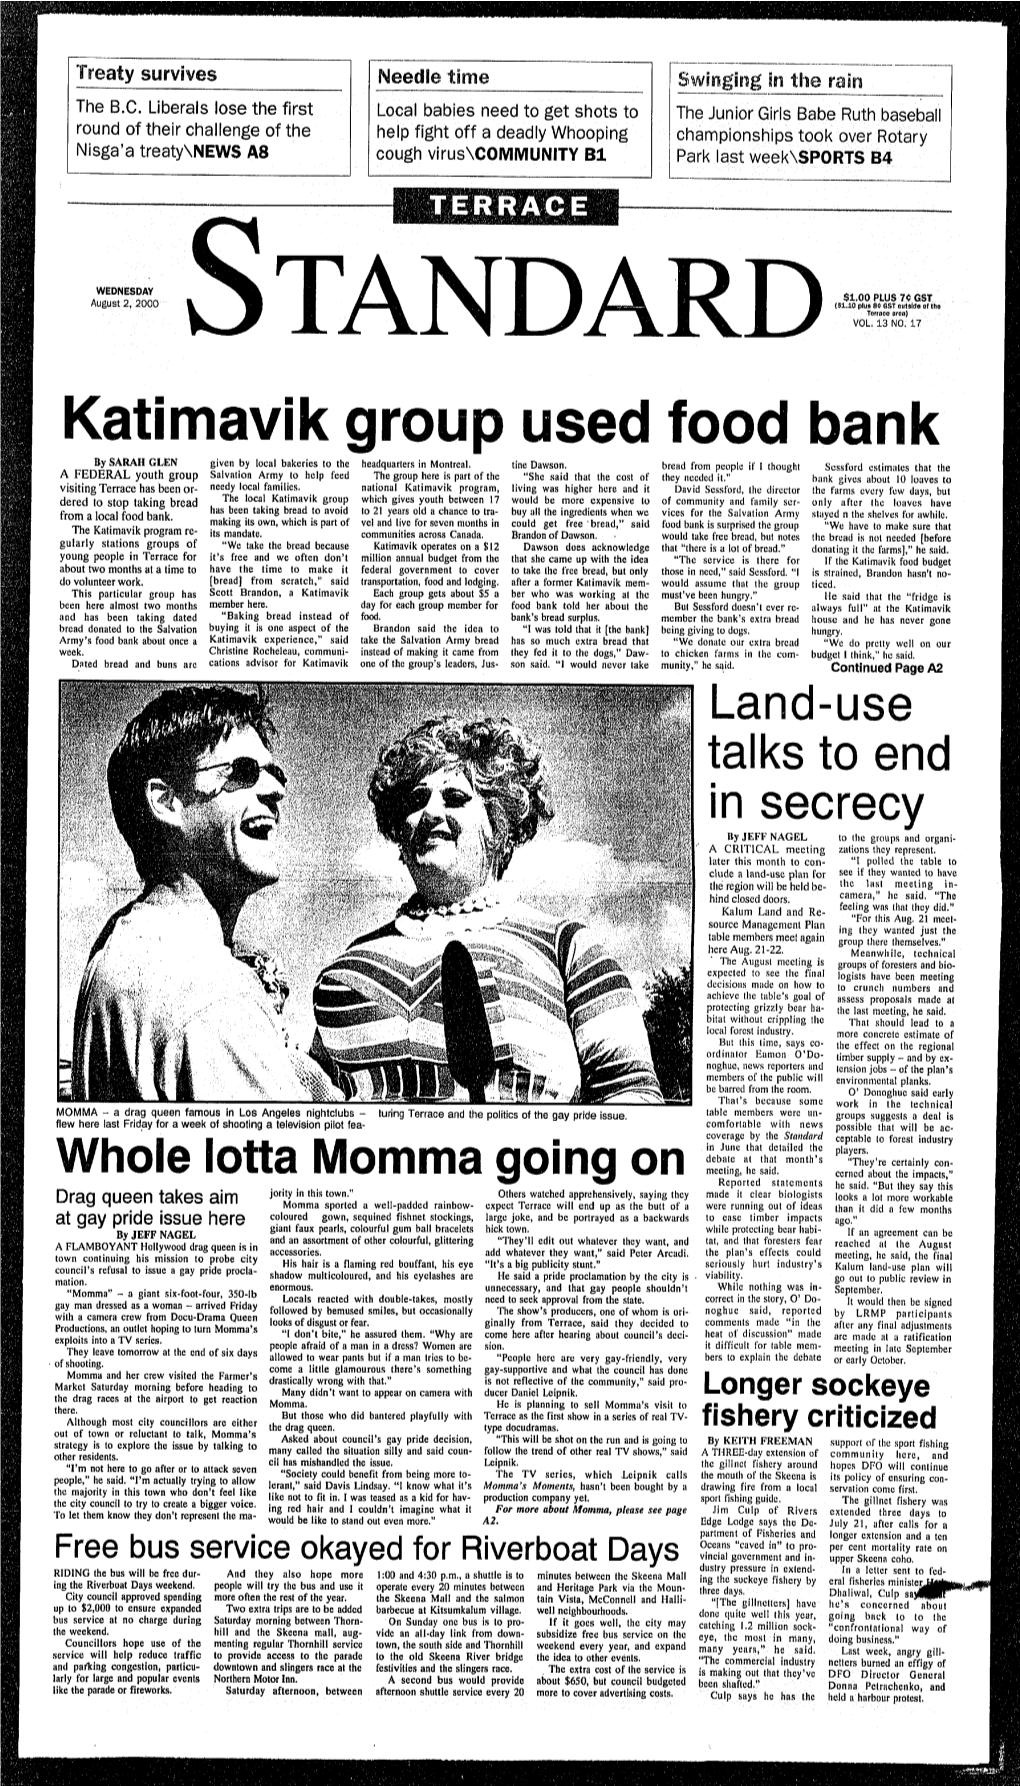 Katimavik Group Used Food Bank by SARAH GLEN Given by Local Bakeries to the Headquarters in Montreal